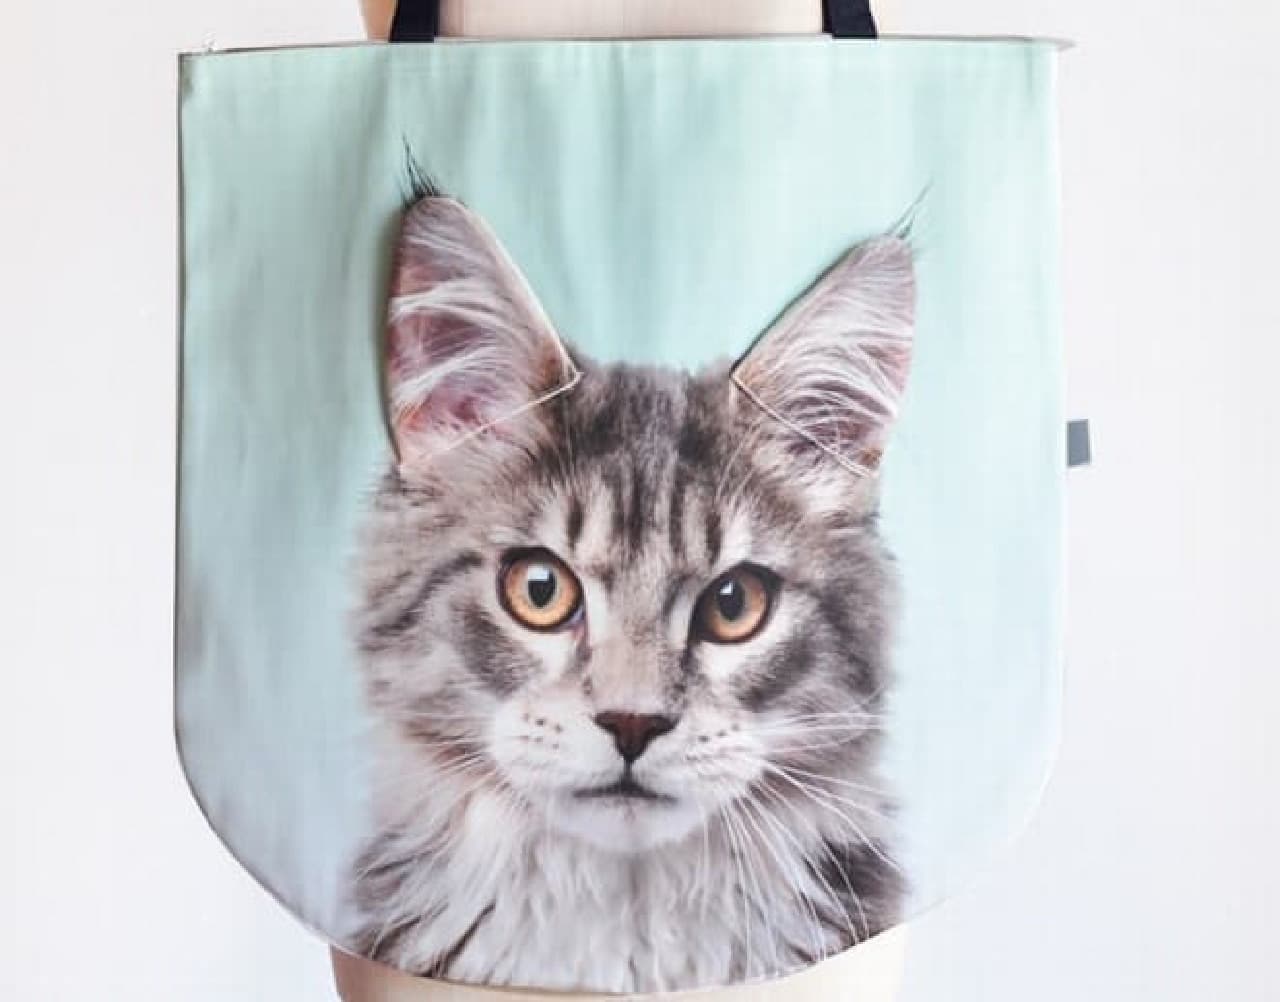 Newly added "Maine Coon"